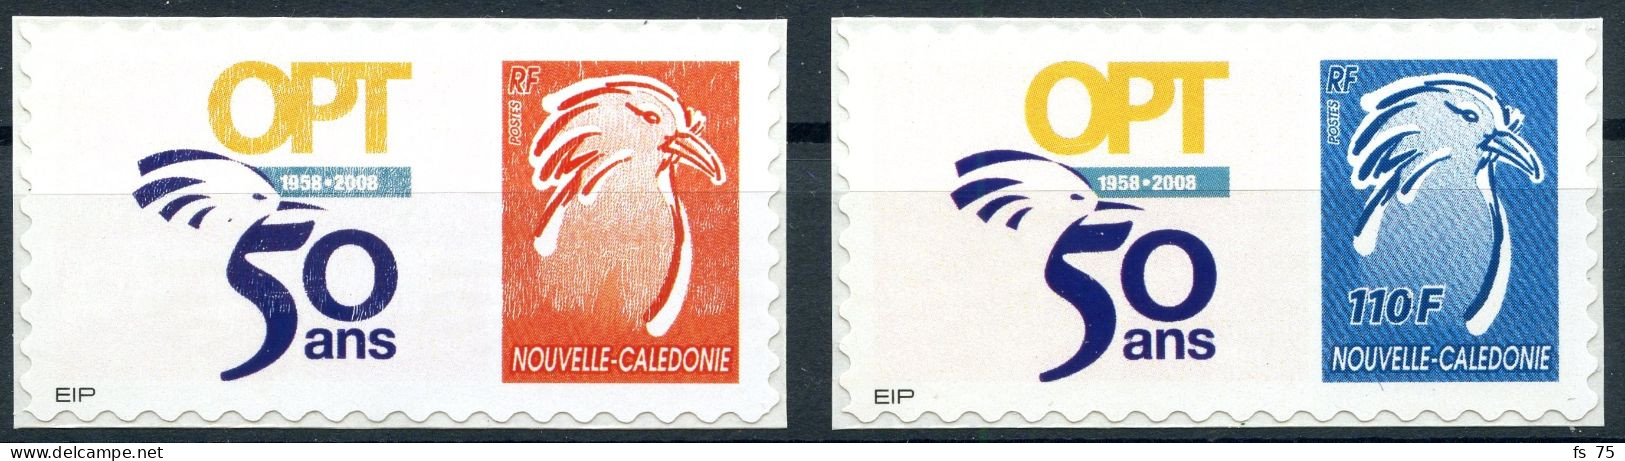 NOUVELLE CALEDONIE N°1051/1052 - TIMBRES PERSONNALISES ADHESIFS - CAGOU - LOGO "OPT" - Unused Stamps